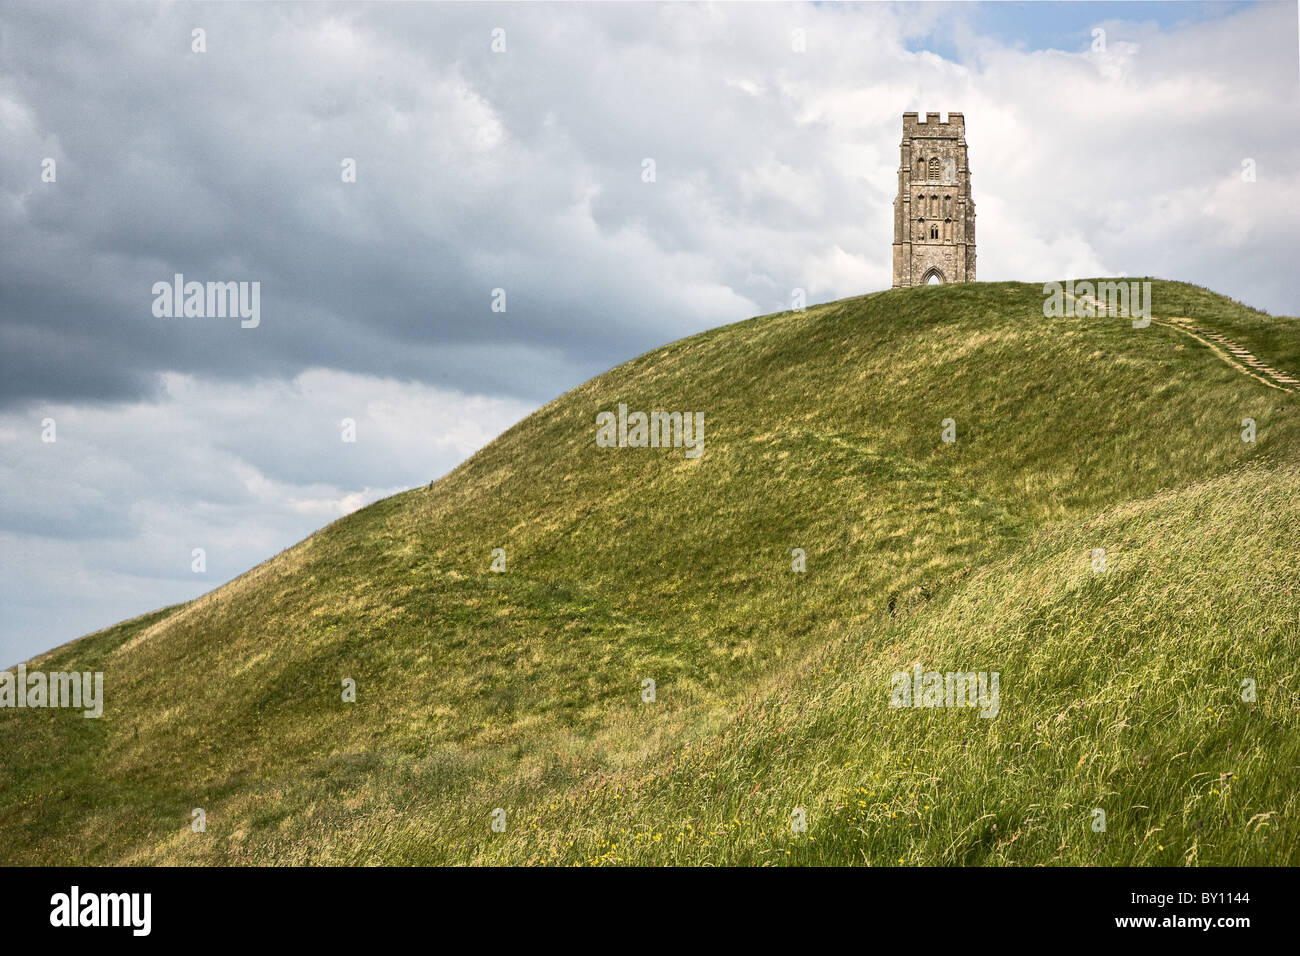 St. Michaels Tower on the summit of Glastonbury Tor in Somerset England Stock Photo